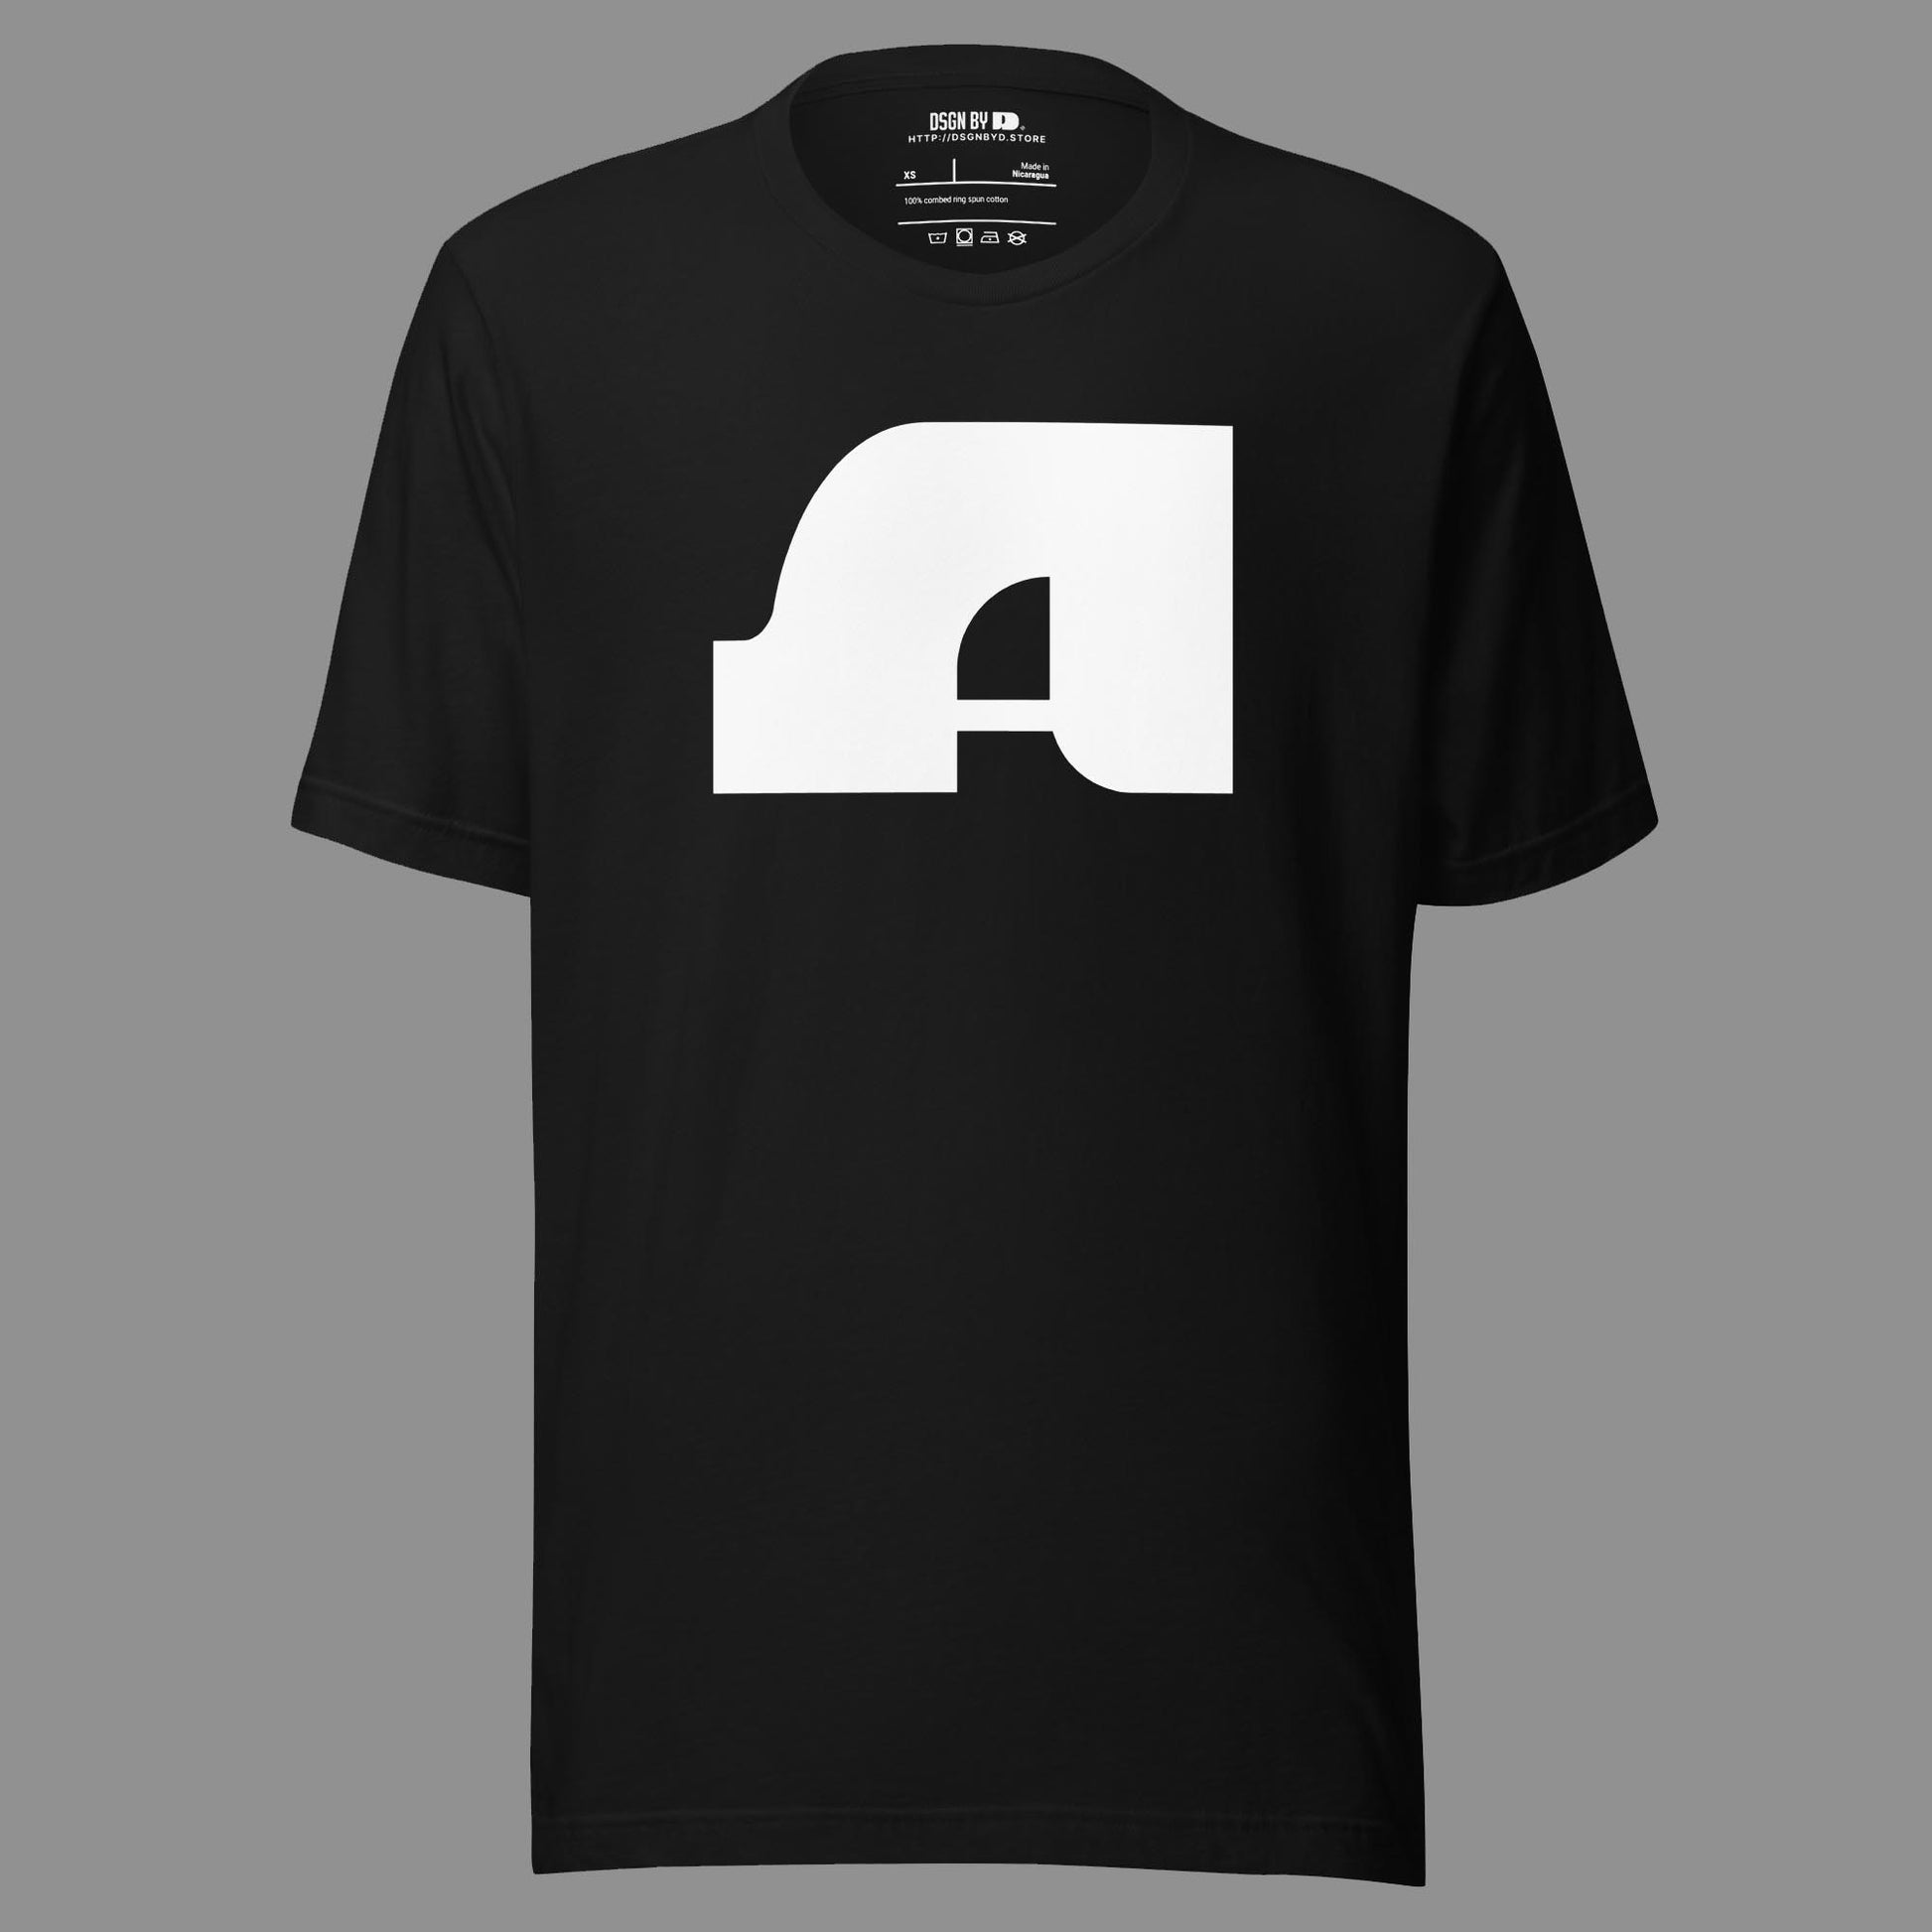 A black cotton unisex graphic tee with letter A.